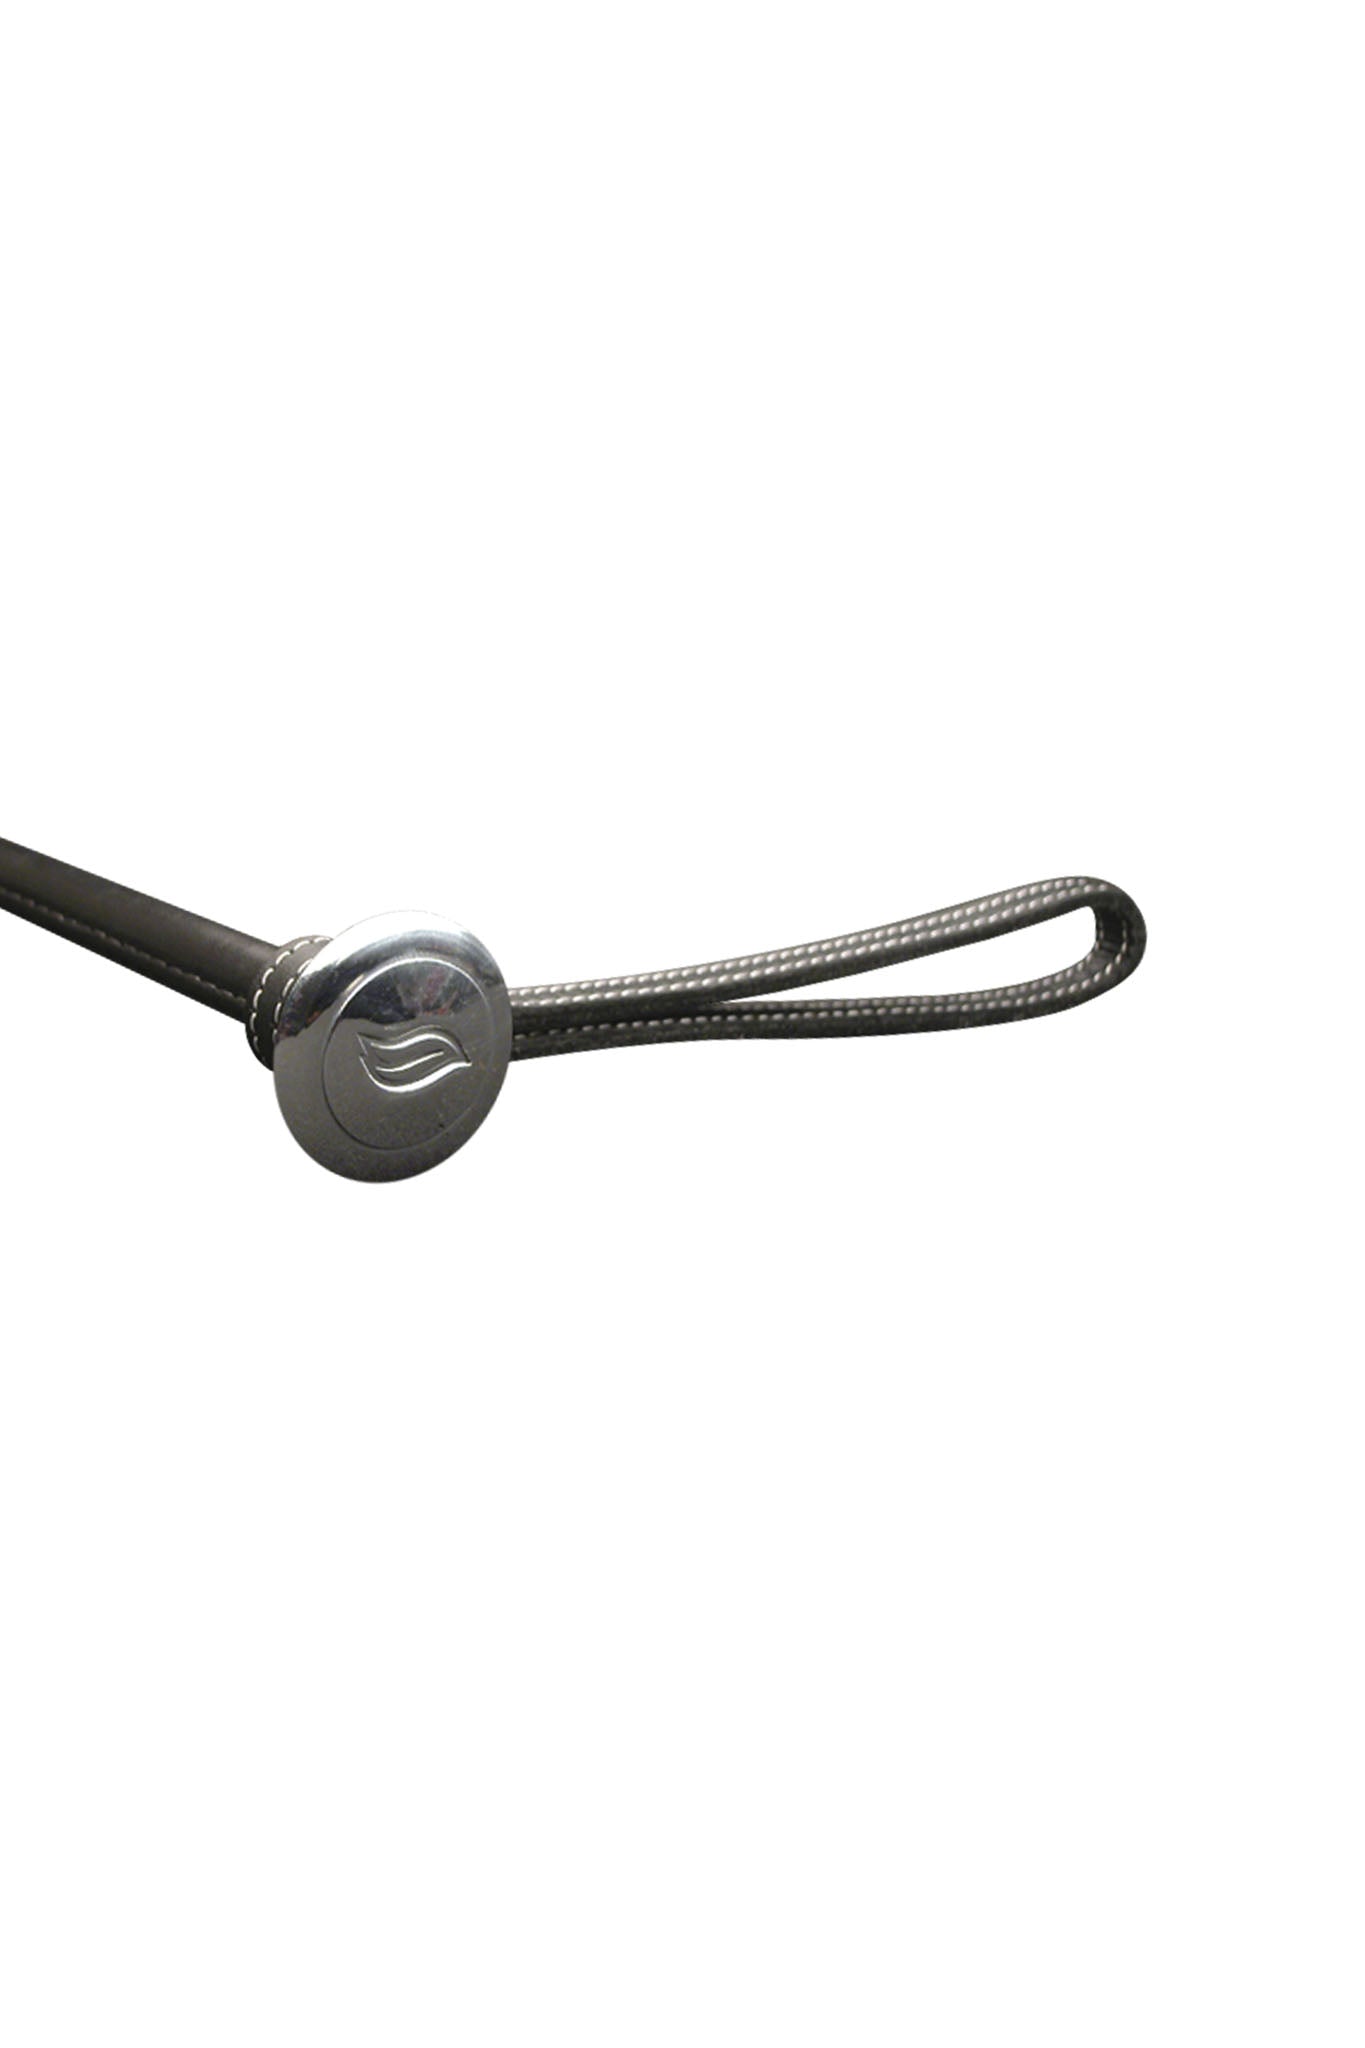 Metal Cap Leather Whip